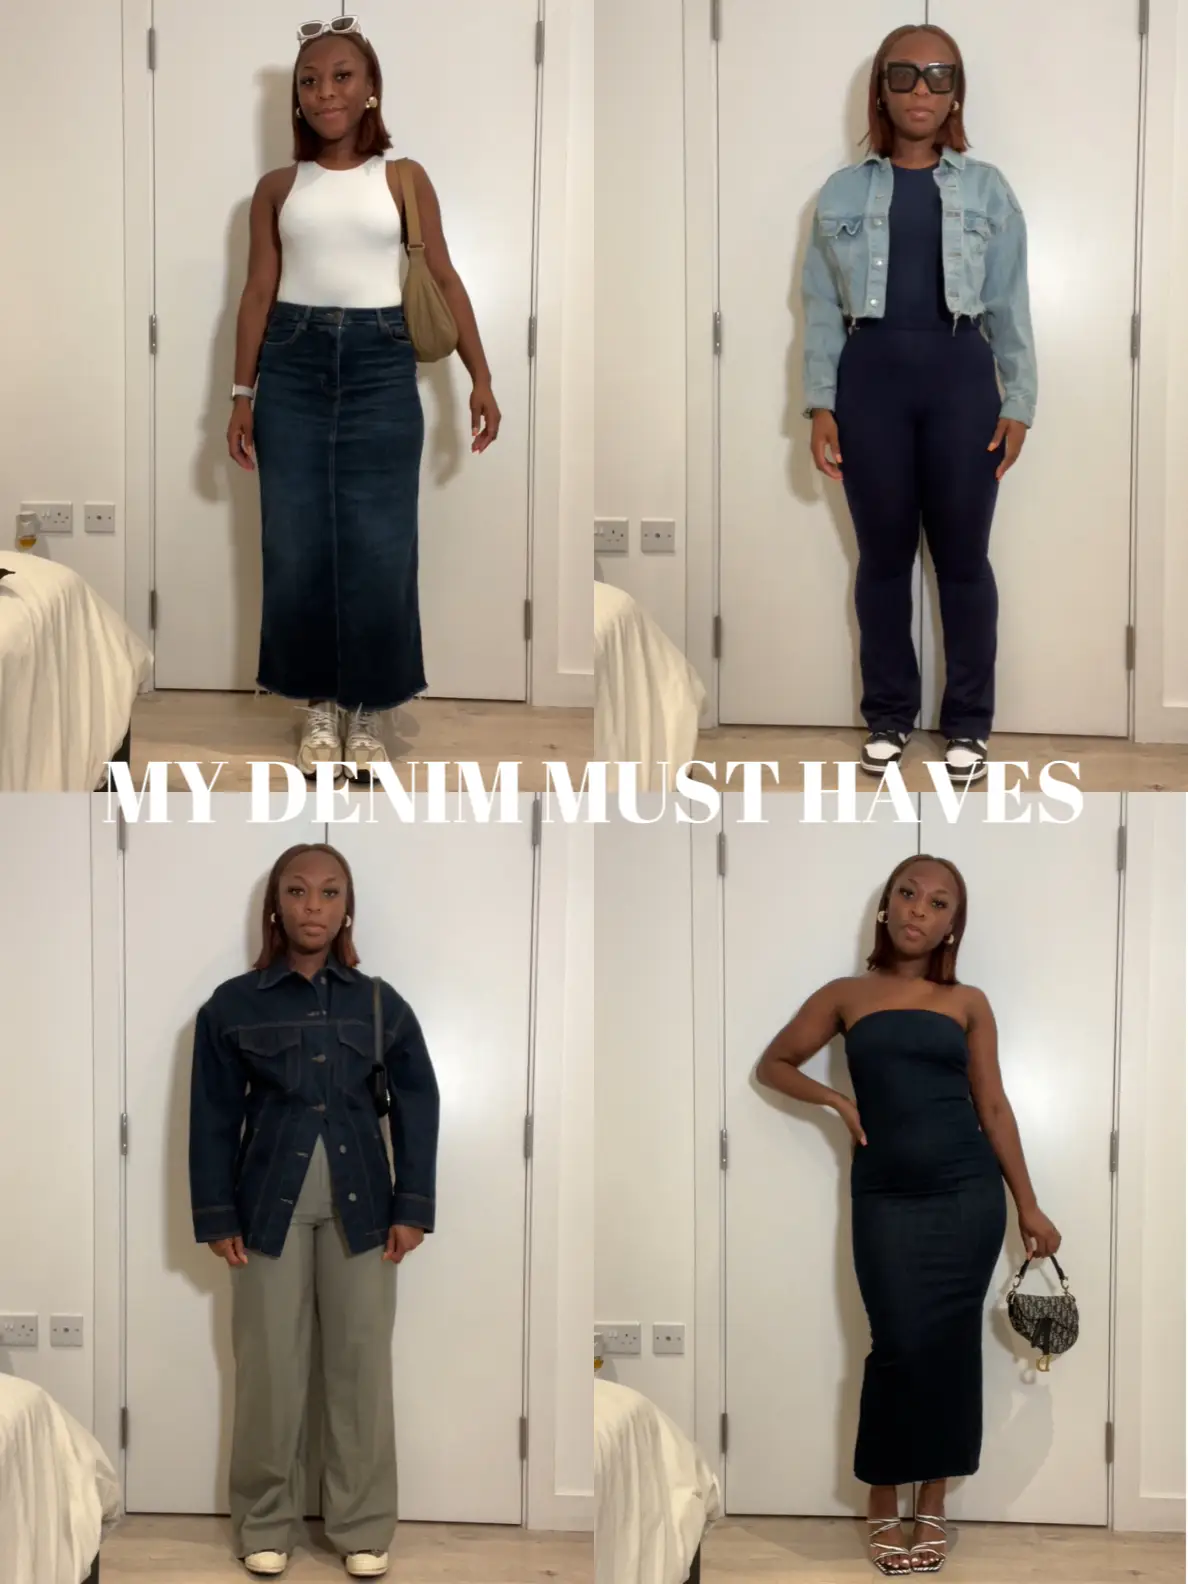 MY DENIM MUST HAVES, Gallery posted by lexuscrystal